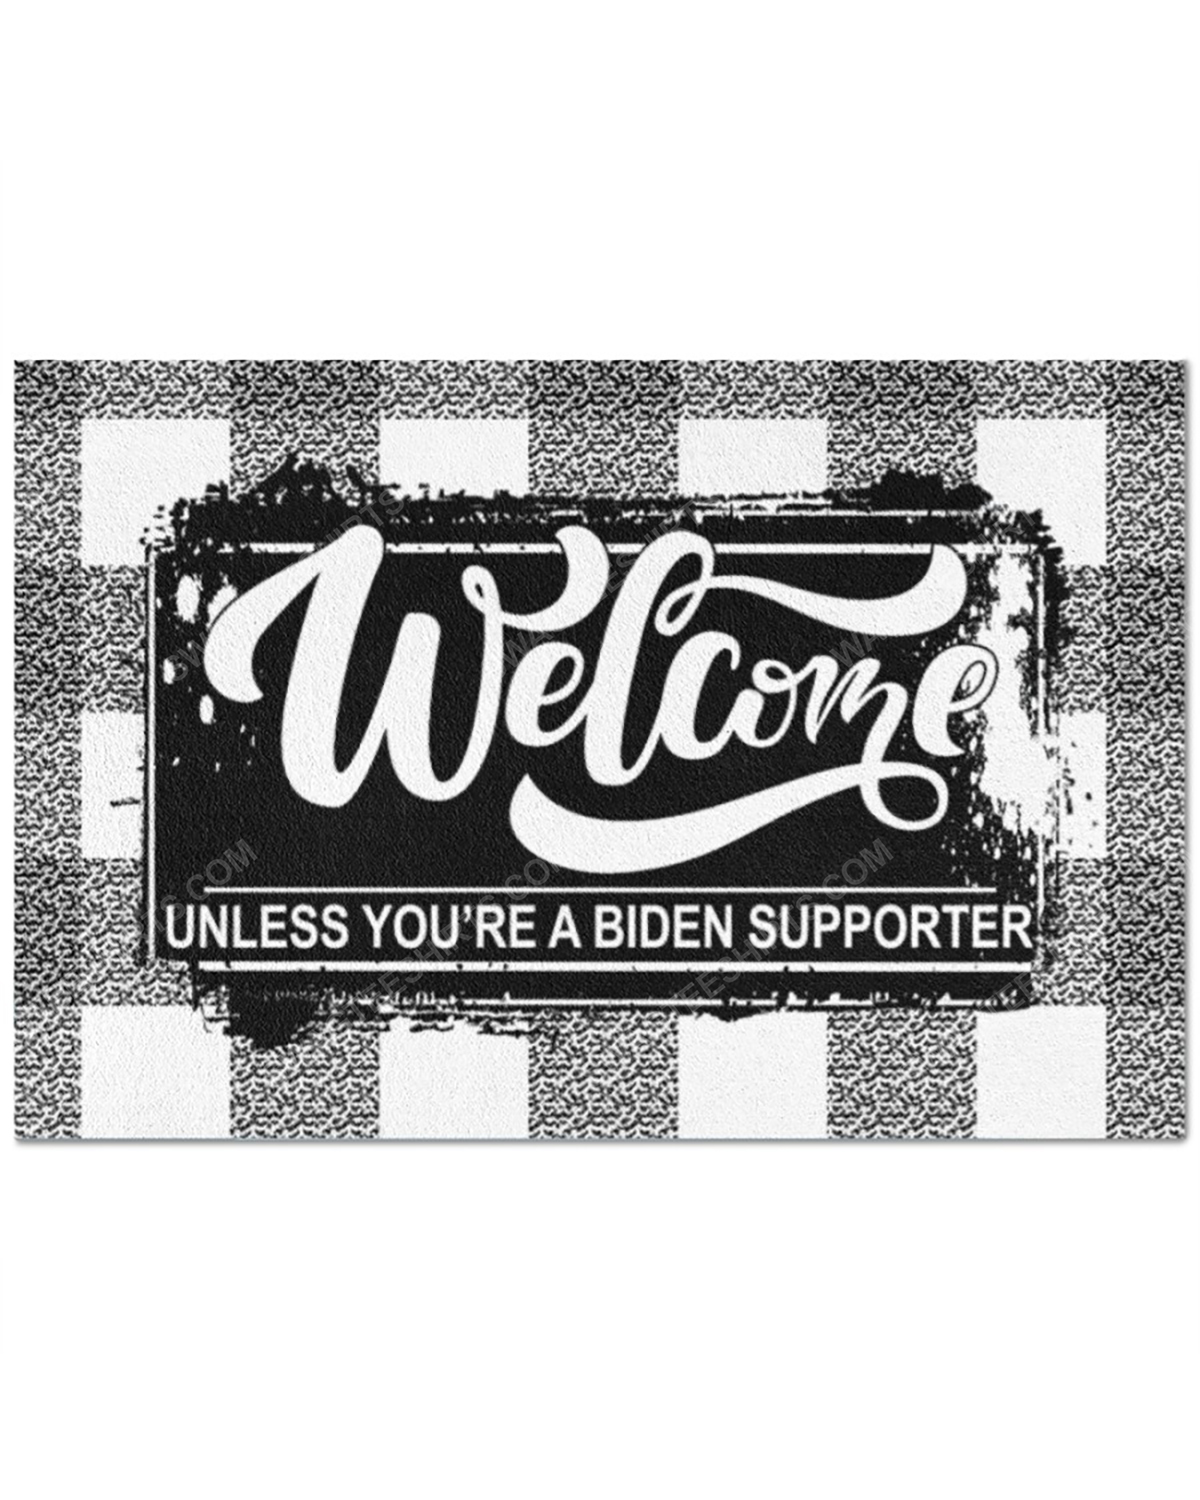 [special edition] Welcome unless you’re a biden supporter doormat – maria